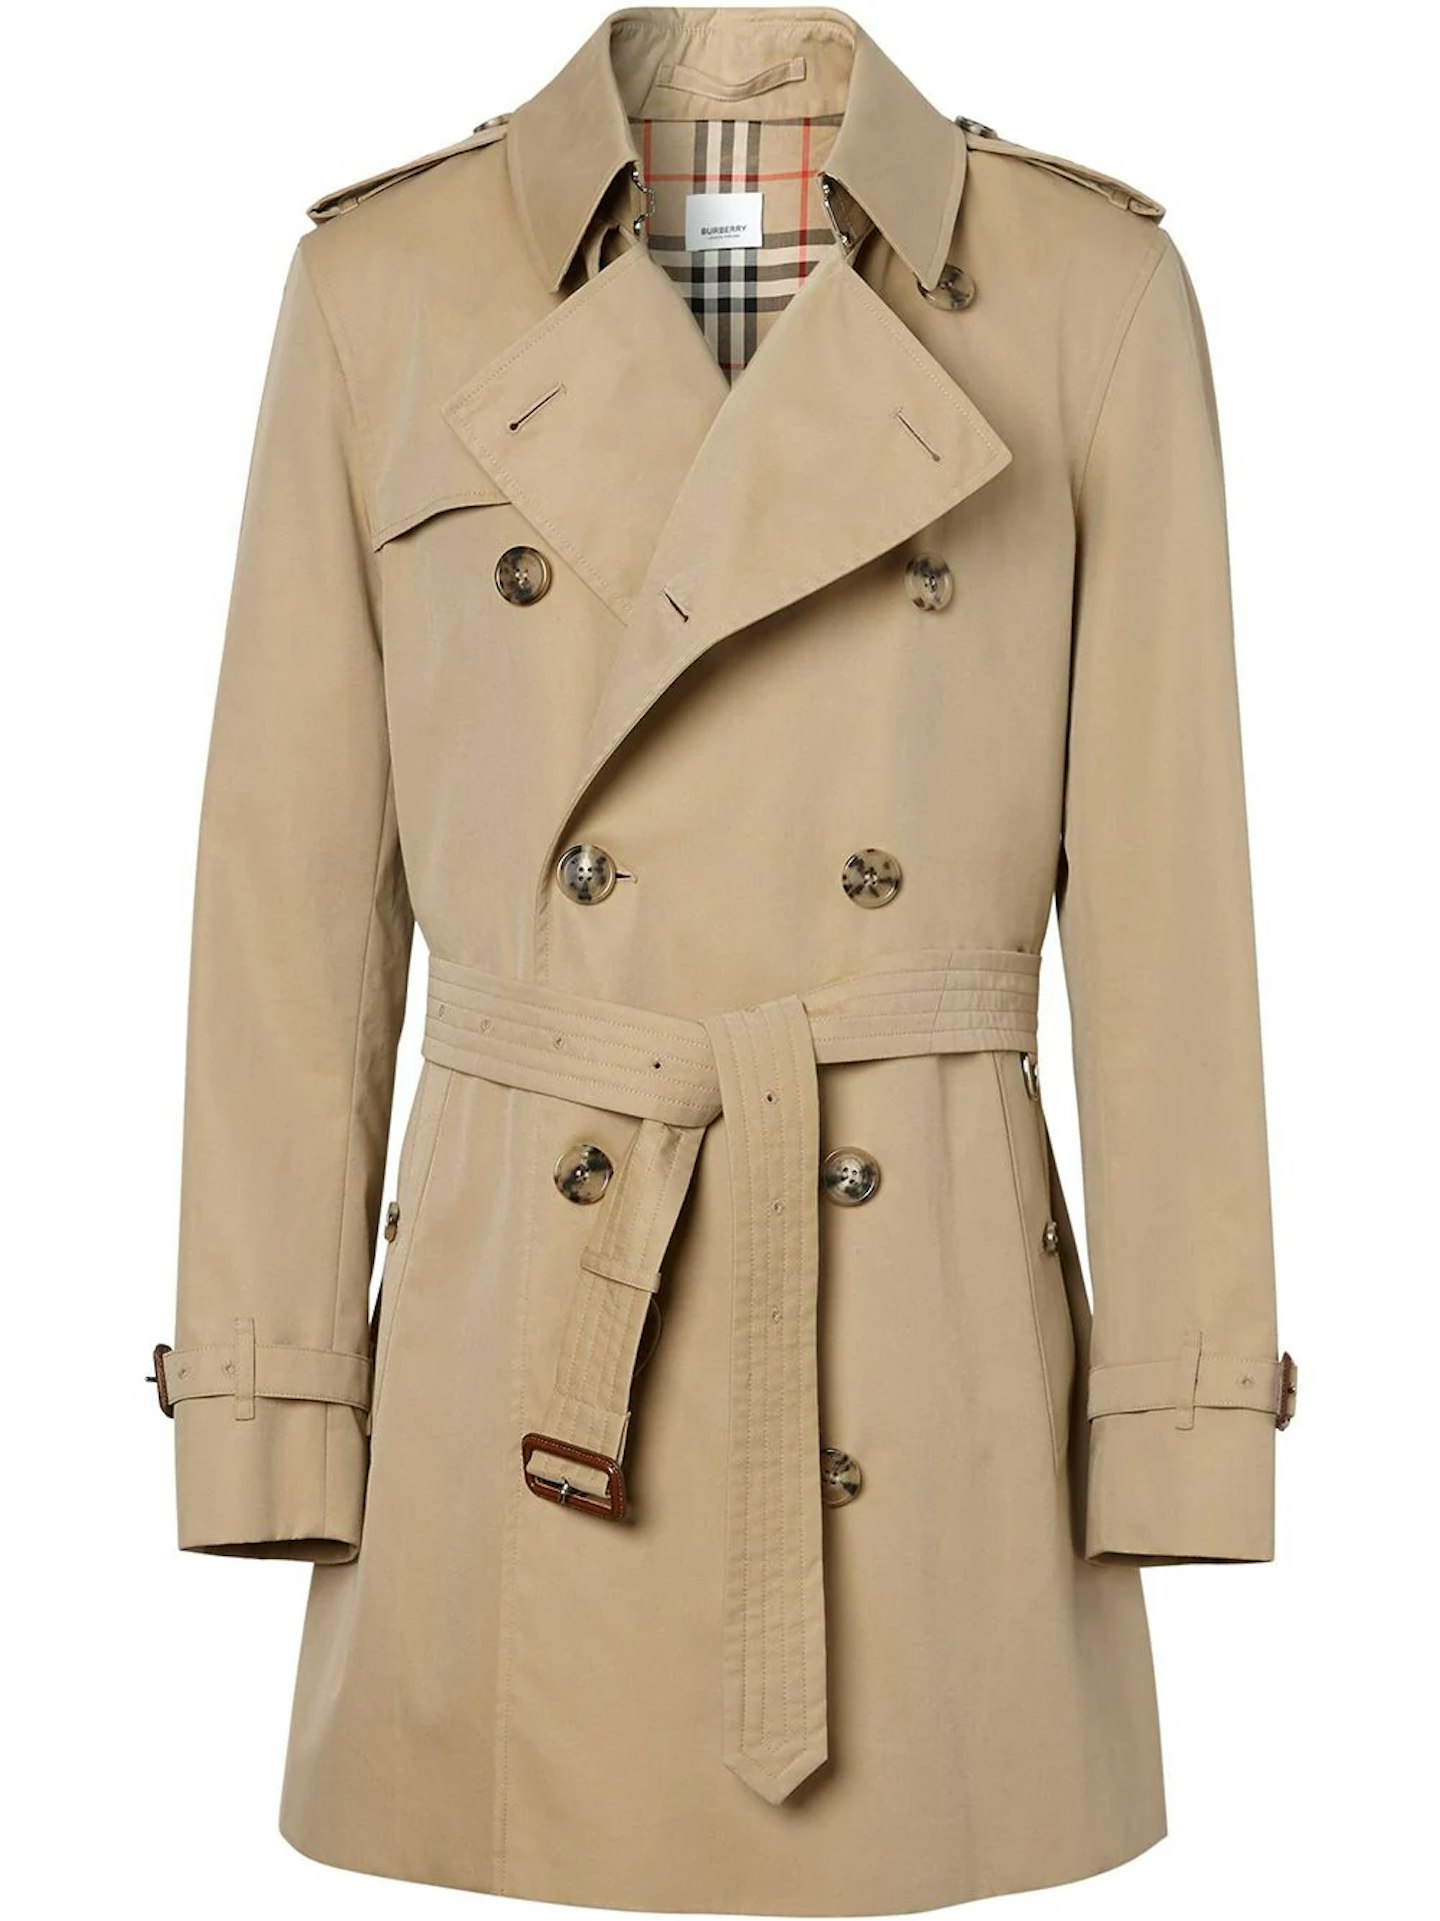 burberry trench coat claudia winklemann